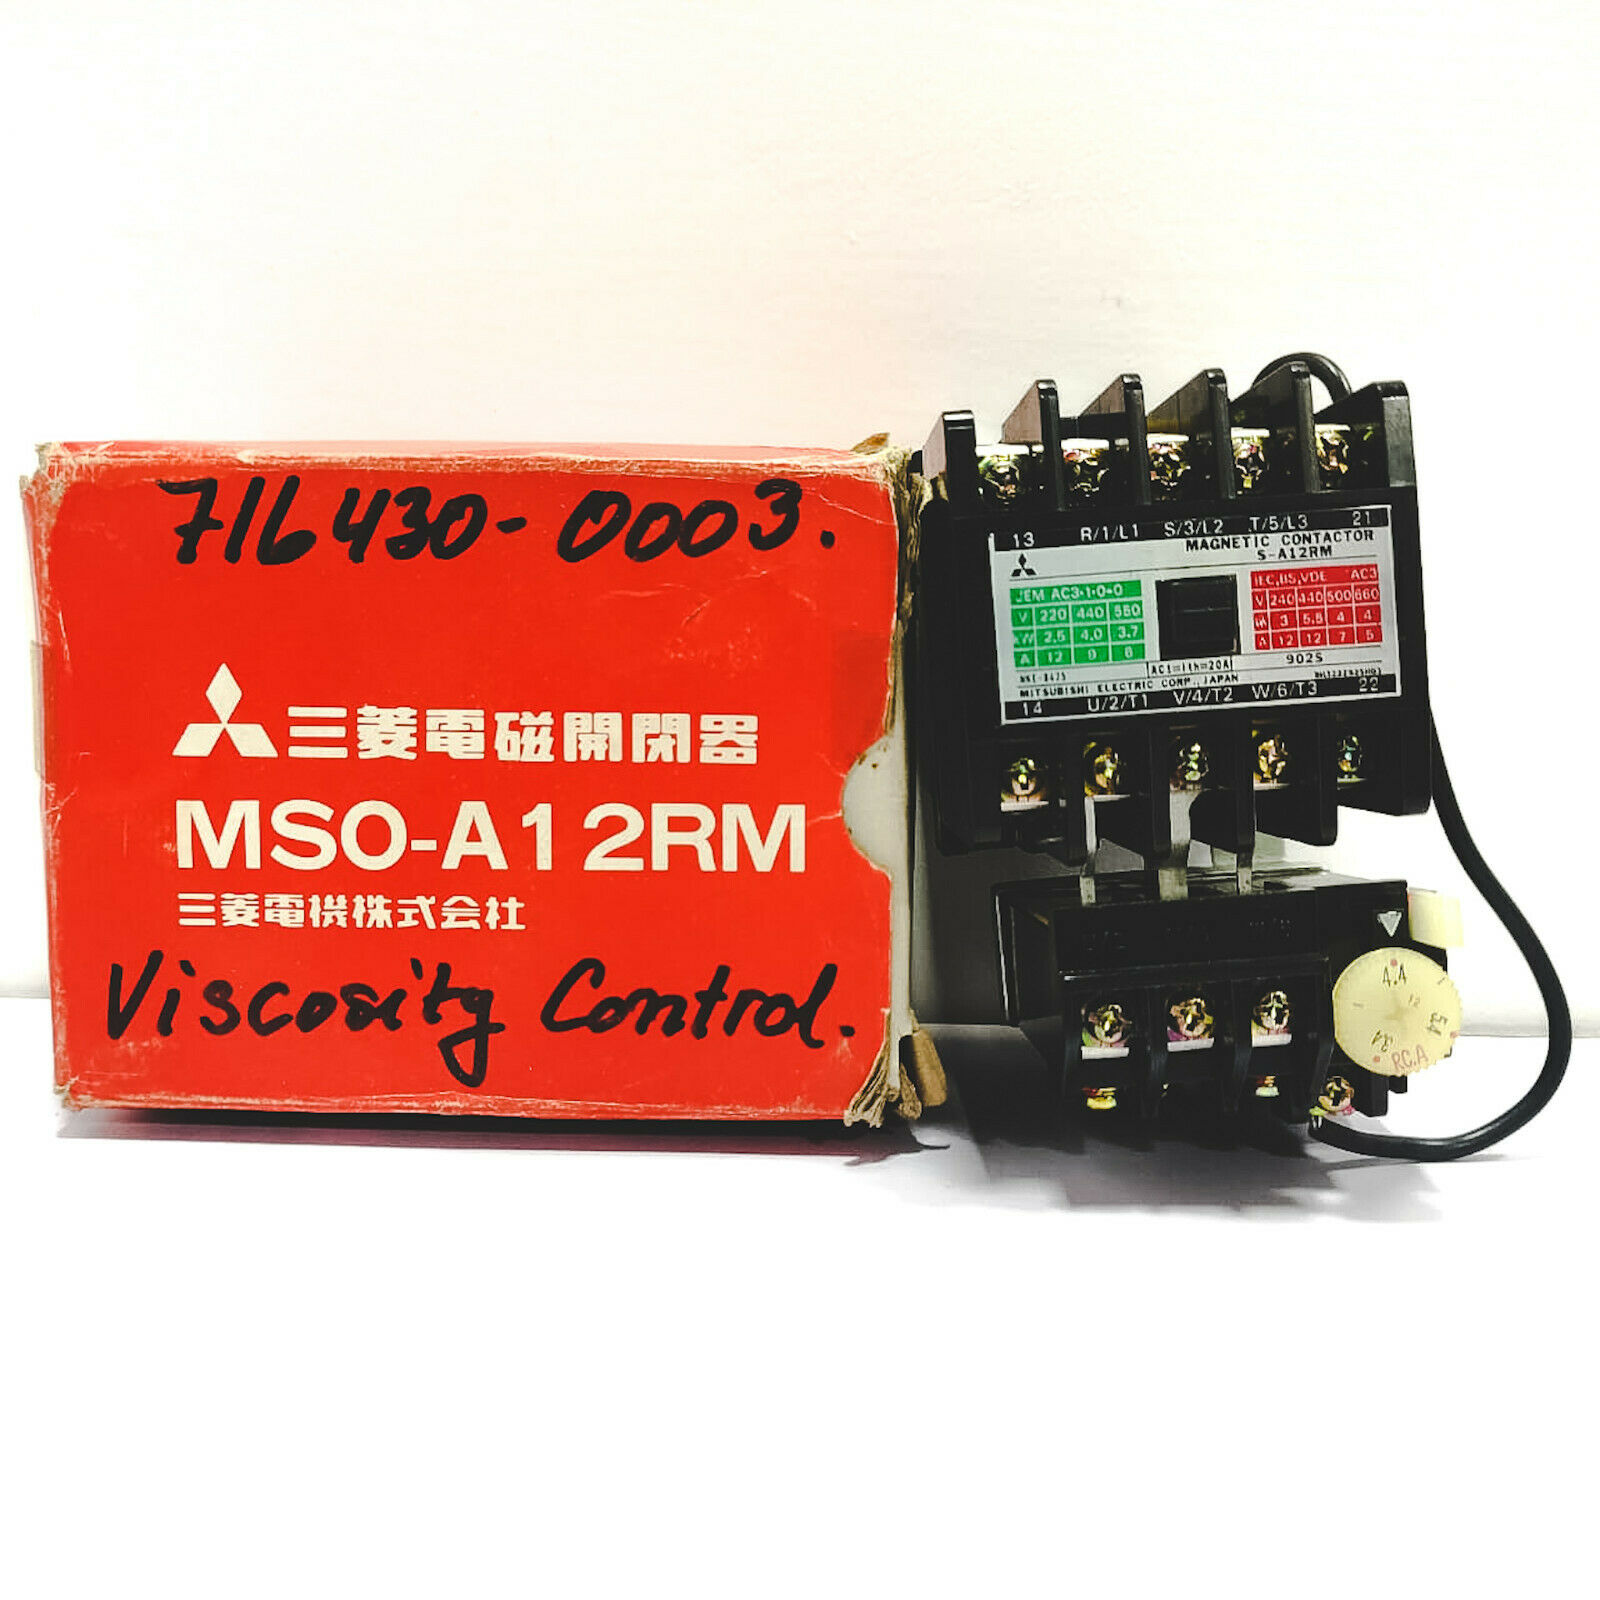 Mitsubishi MSO-A12RM Magnetic Switch